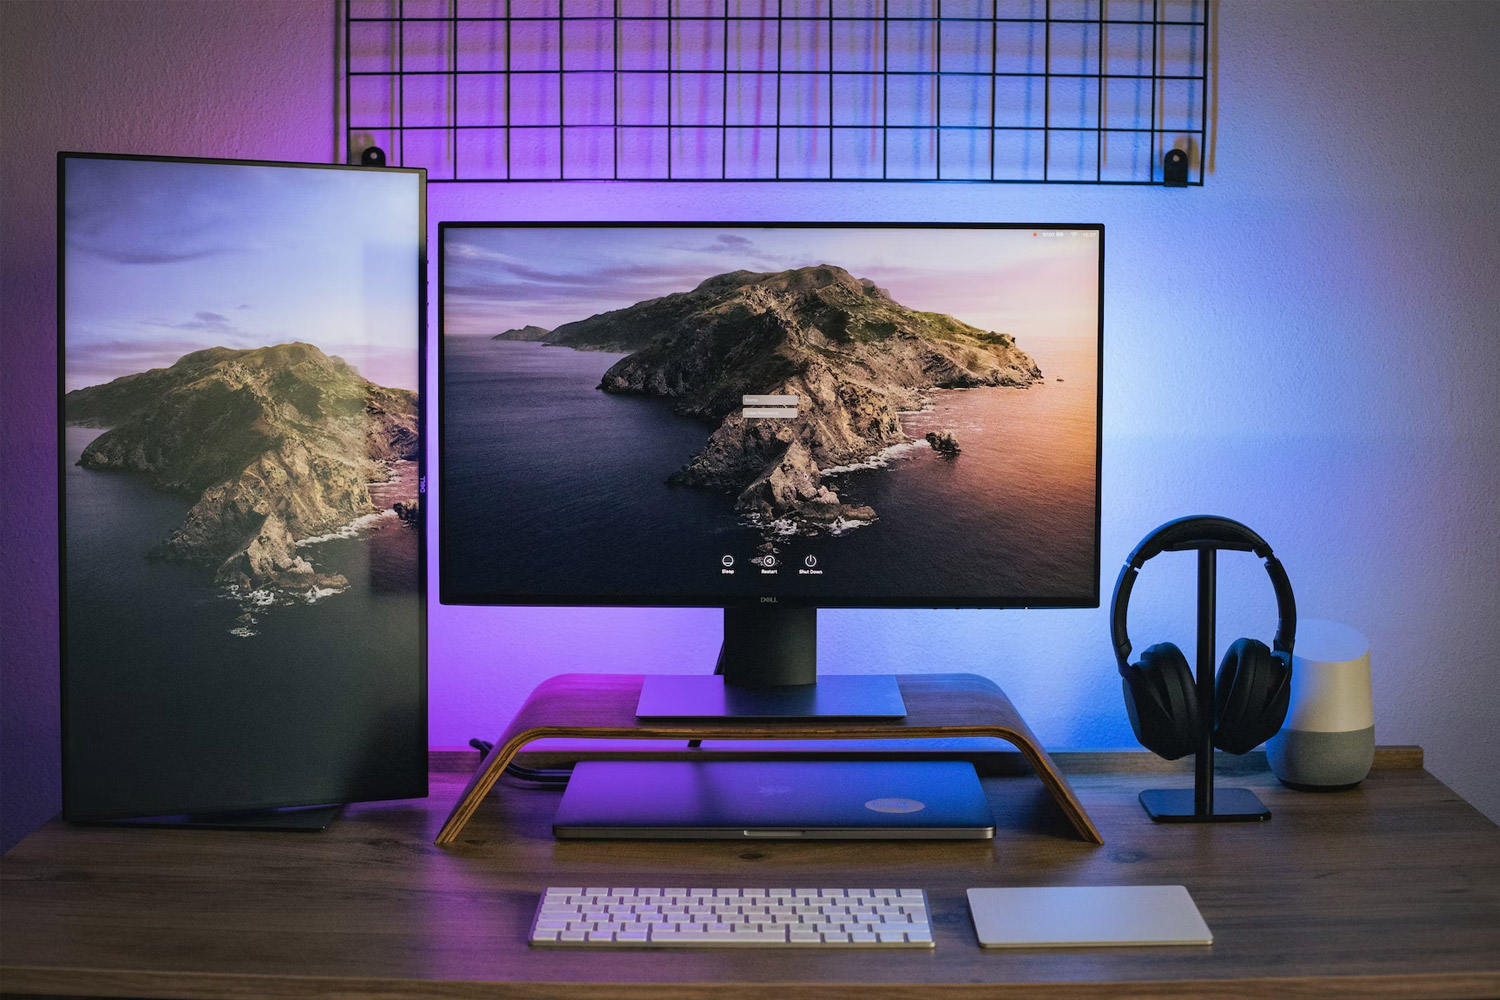 Are Ultrawide Monitors Useful? - 5 Advantages of an Ultrawide